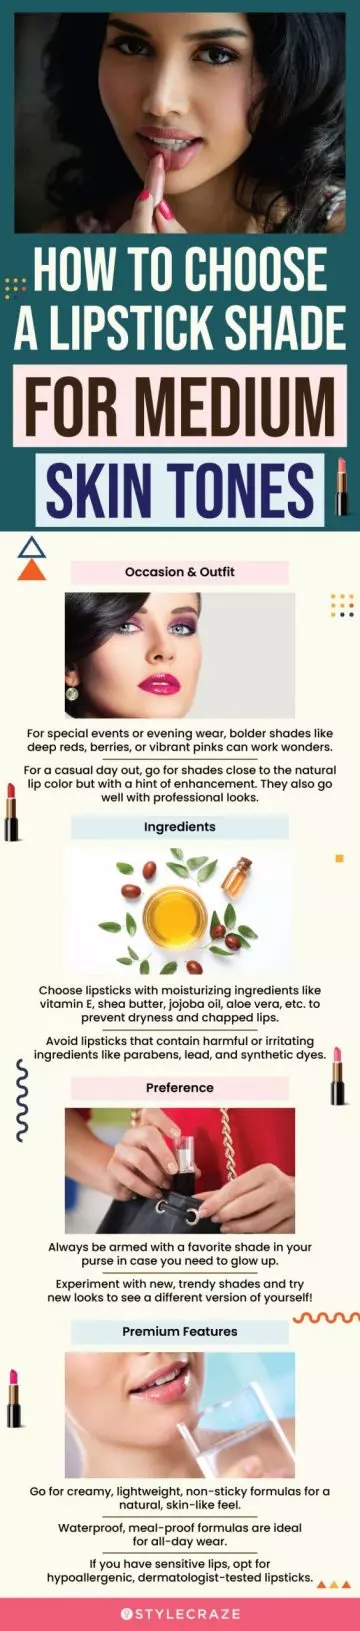 How To Choose A Lipstick Shade For Medium Skin Tones (infographic)